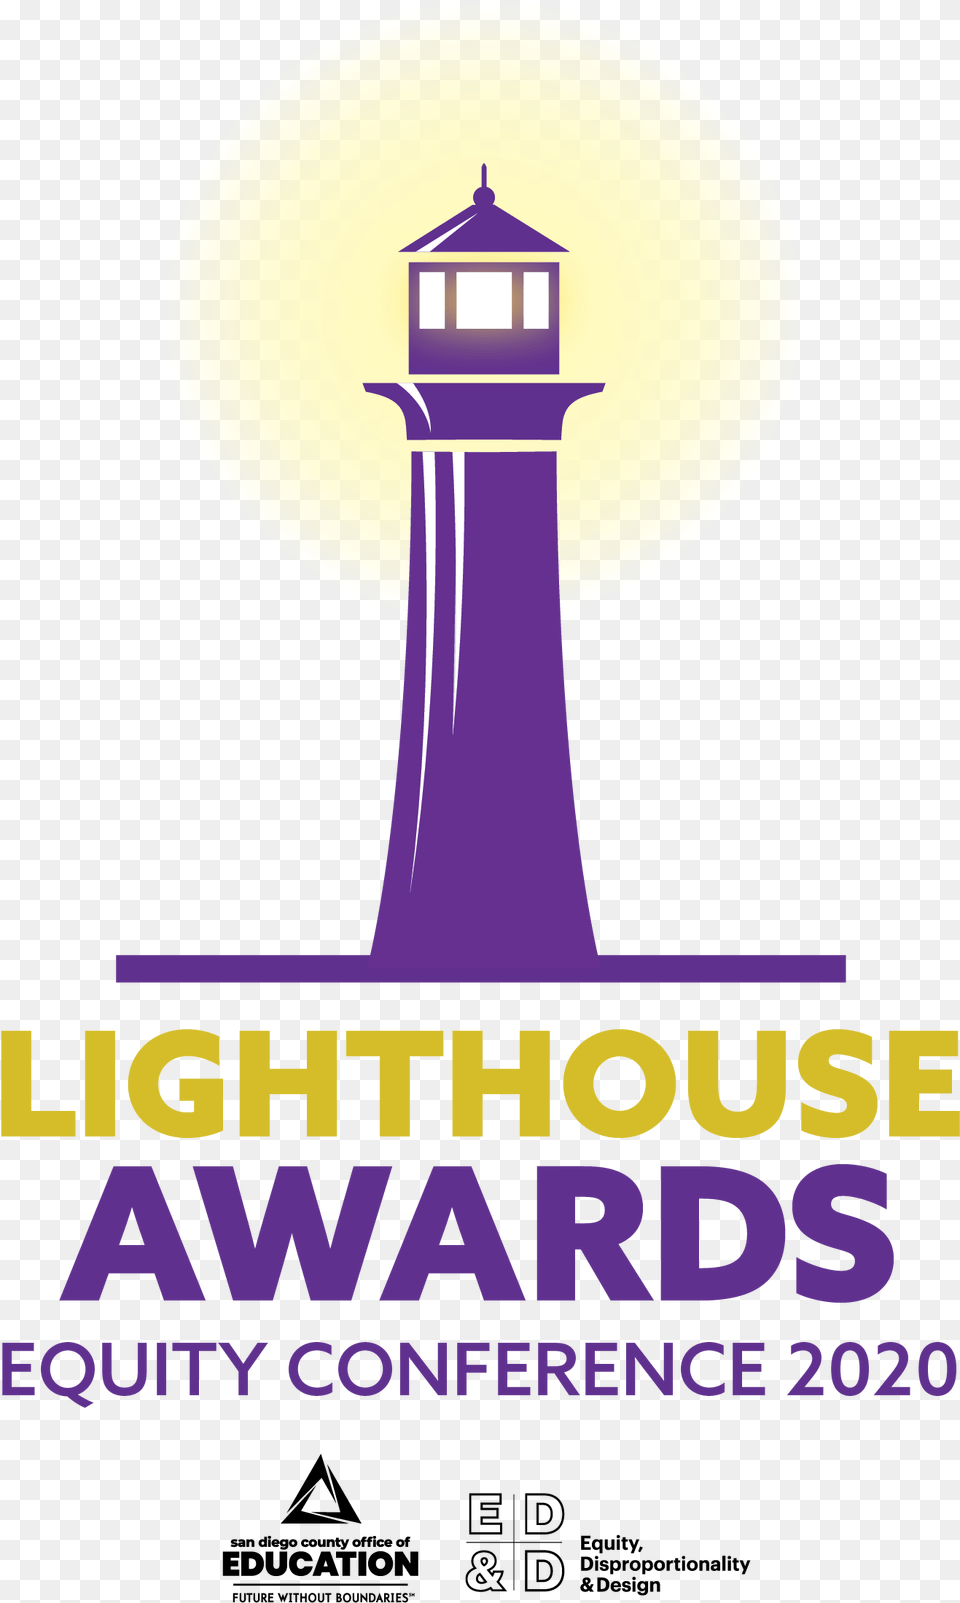 Lighthouse Awards Poster Png Image